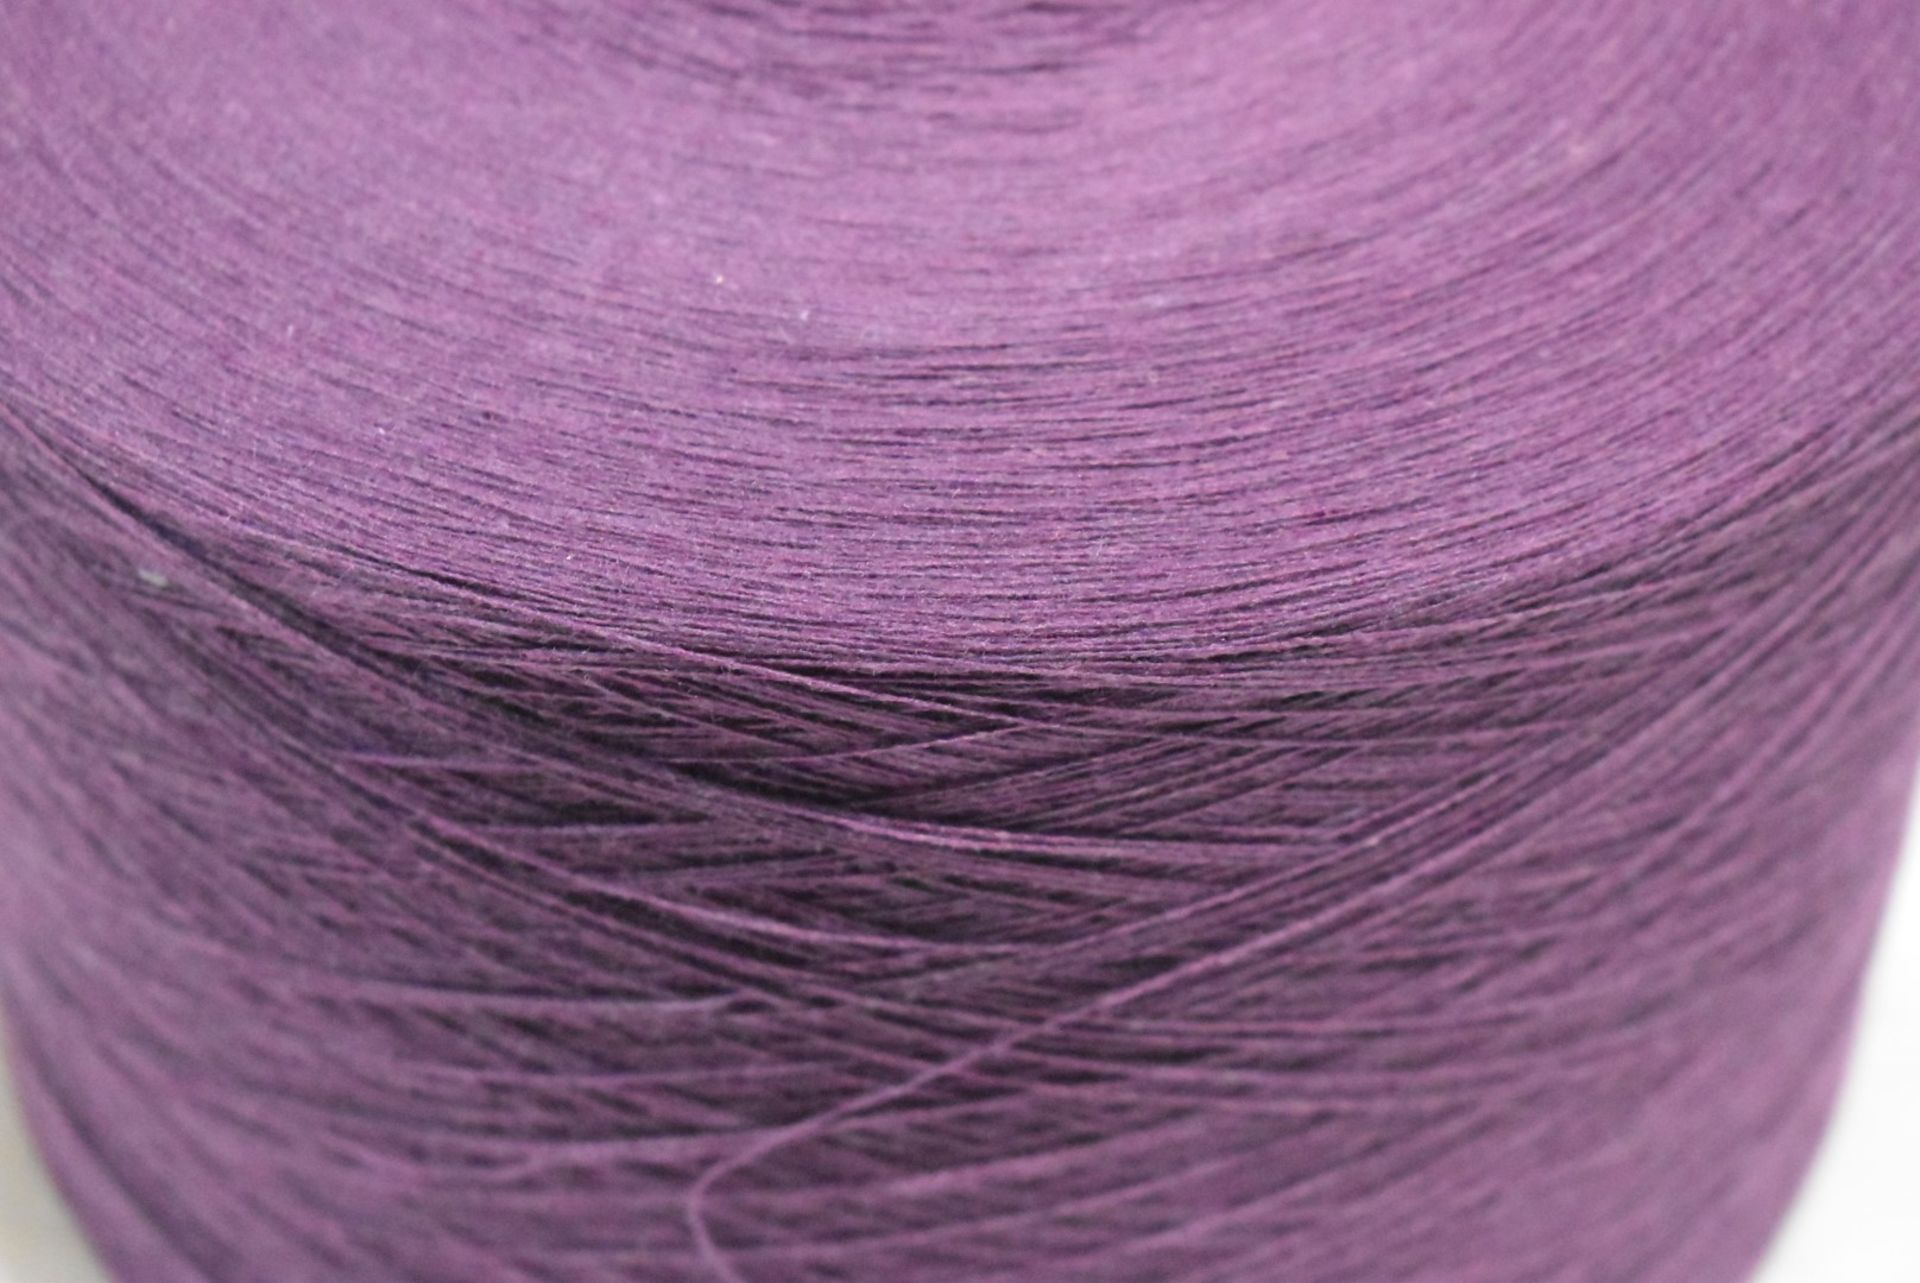 6 x Cones of 1/13 MicroCotton Knitting Yarn - Purple - Approx Weight: 2,300g - New Stock ABL Yarn - Image 7 of 15